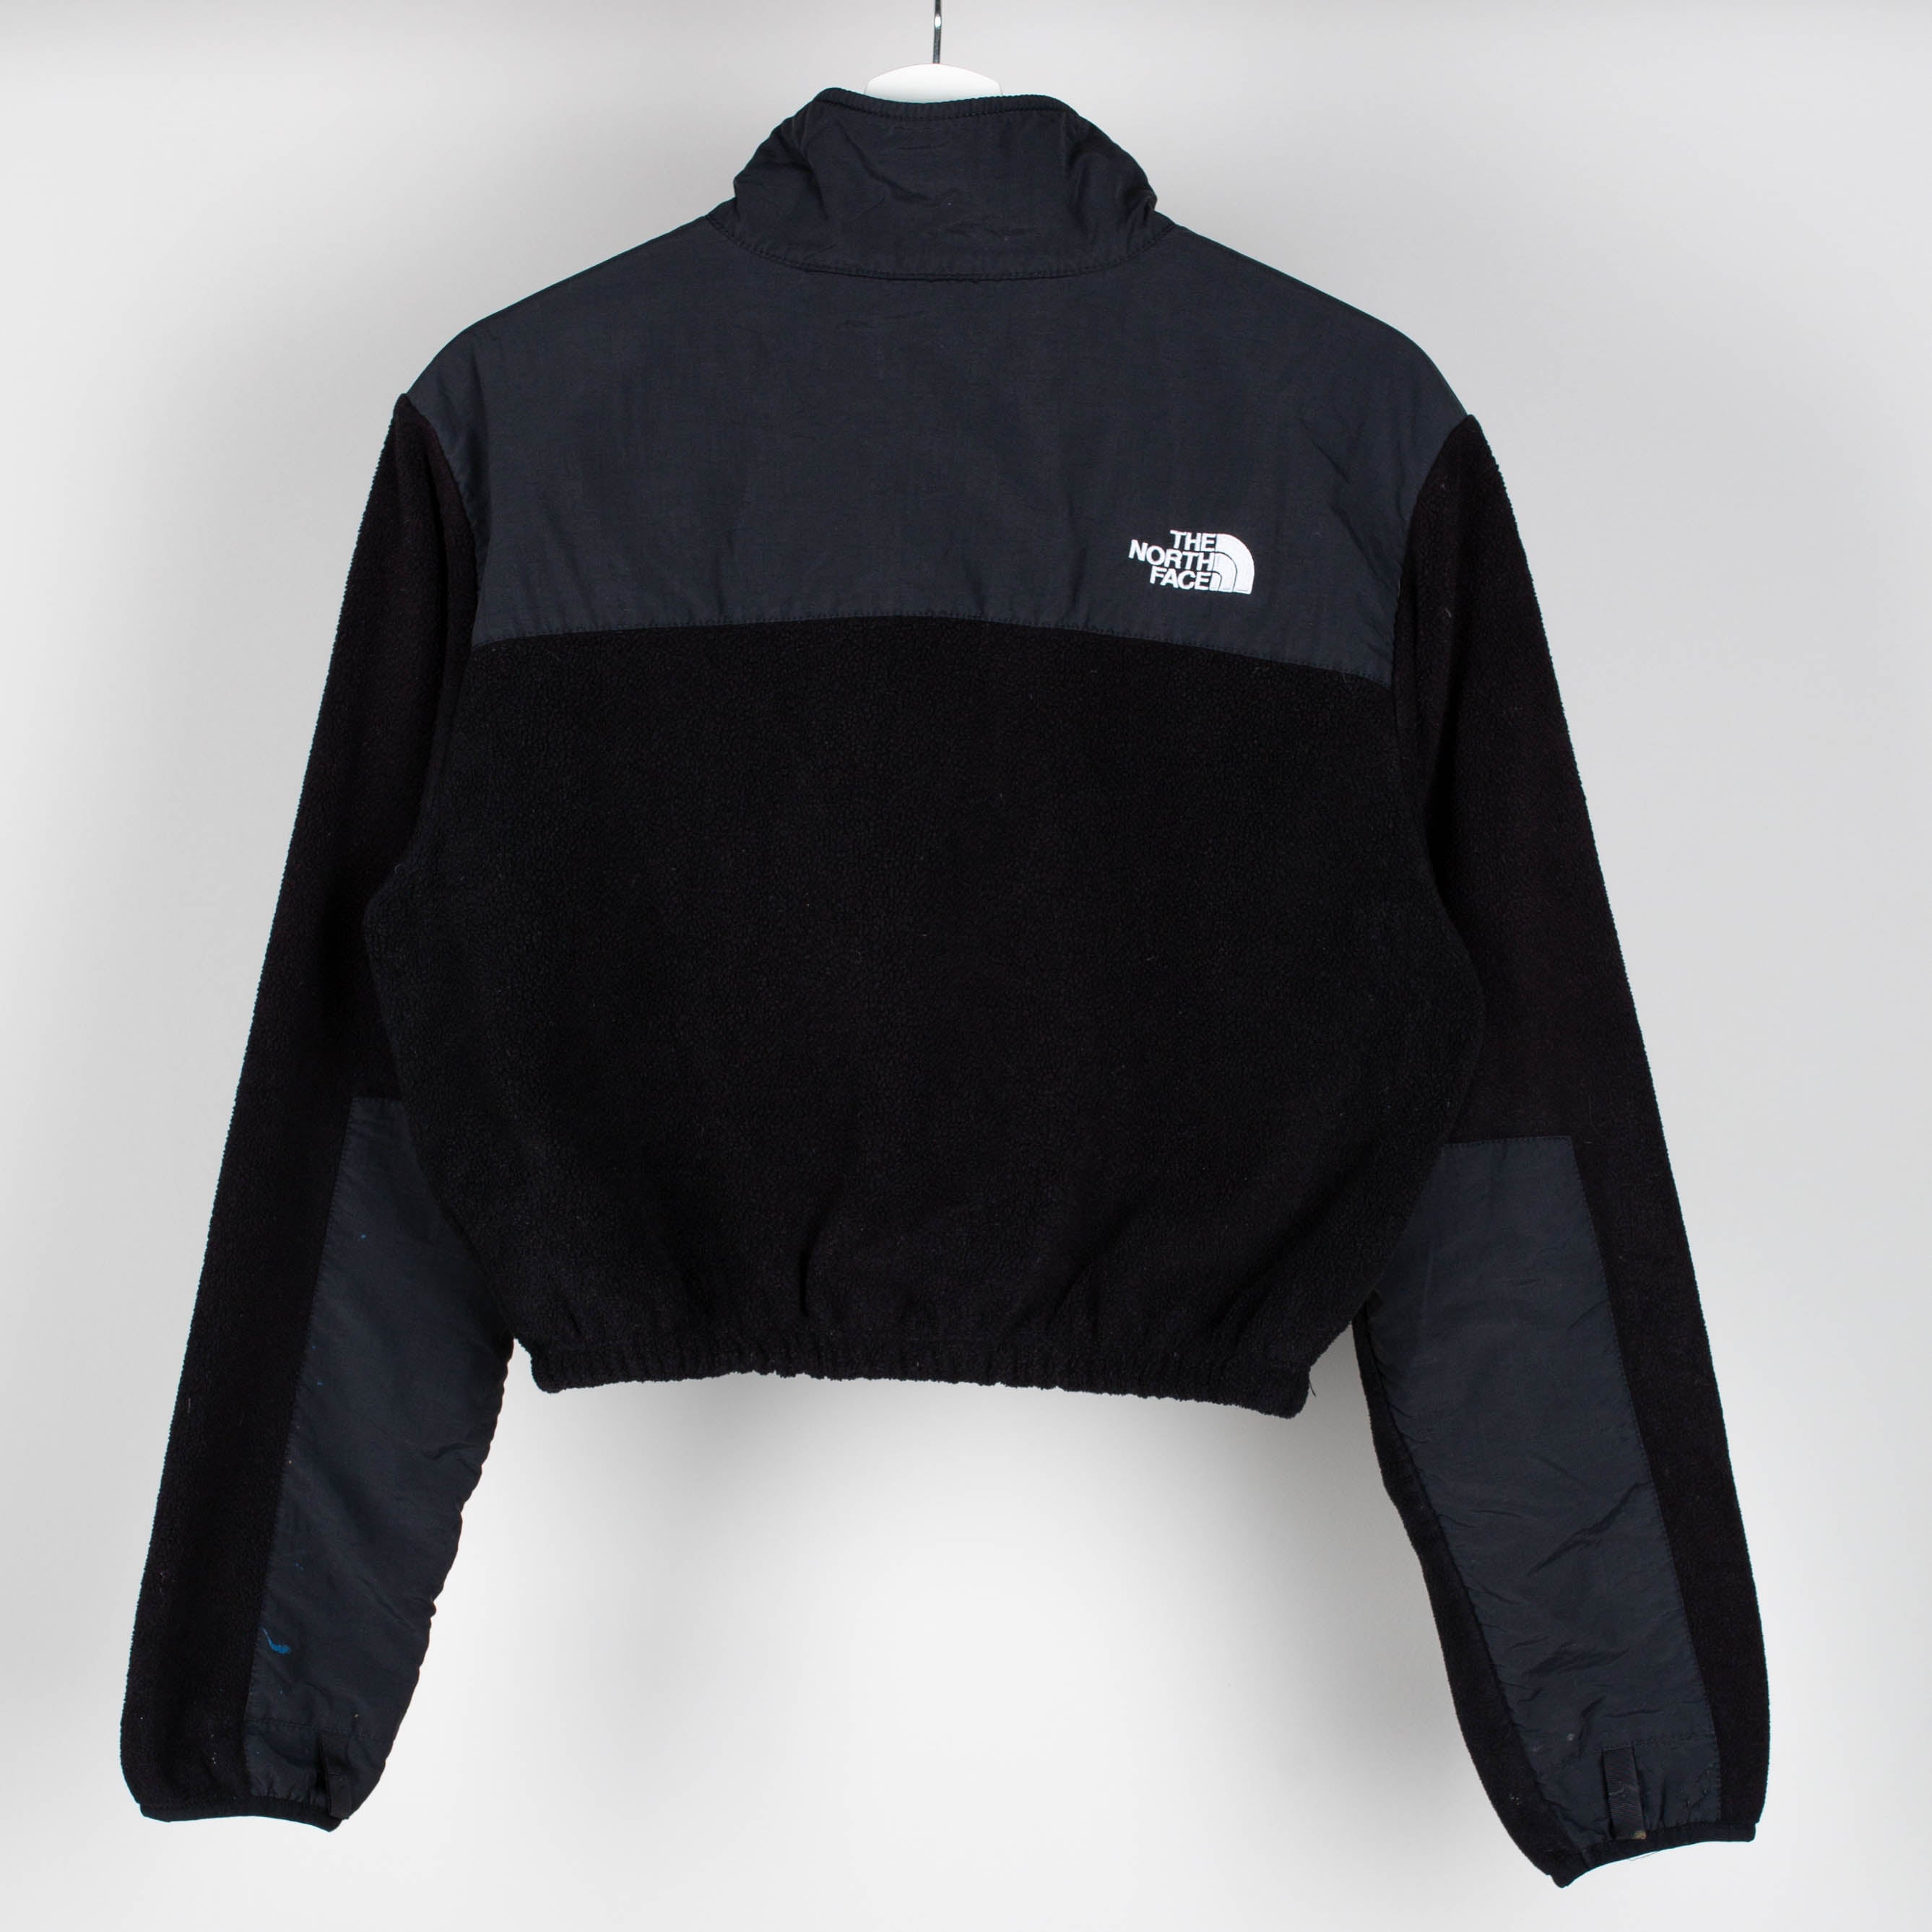 90's Cropped The North Face Sweater Size XL